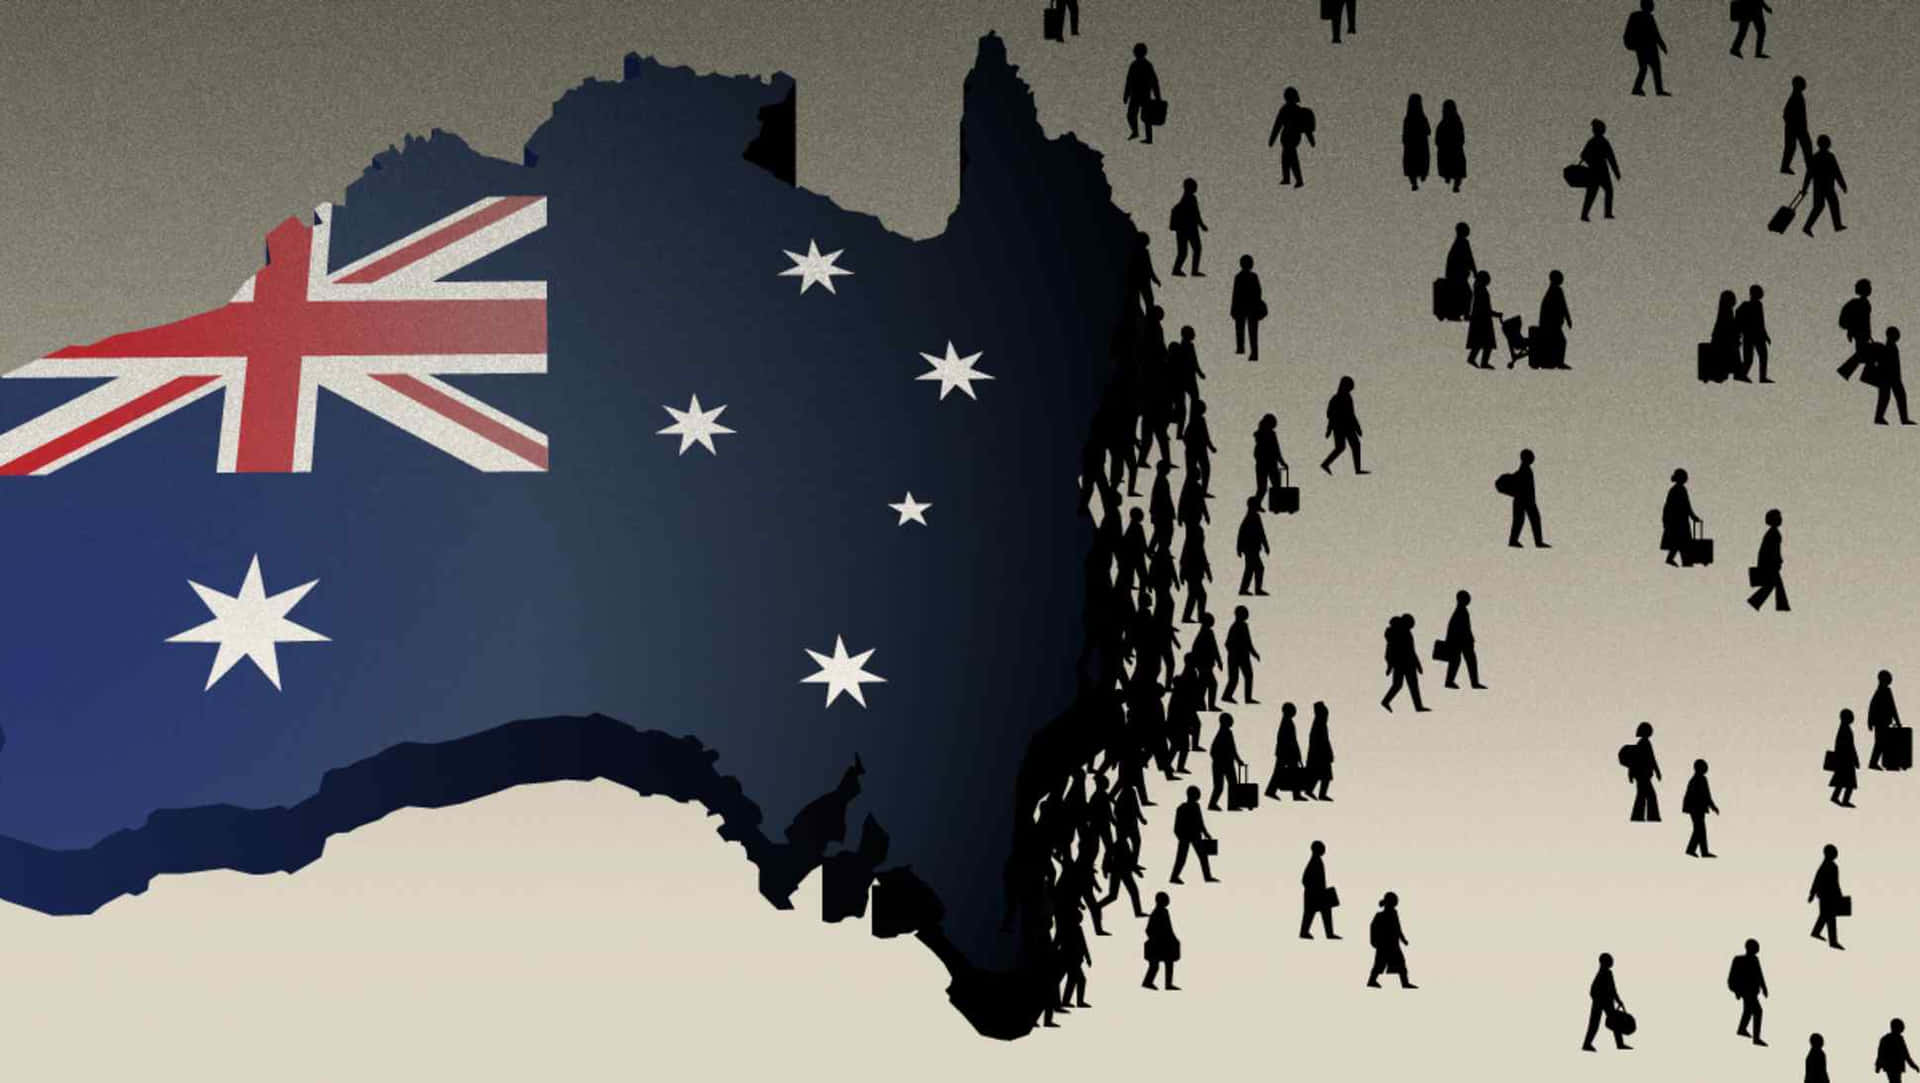 Australian Flag With Silhouettes Of People